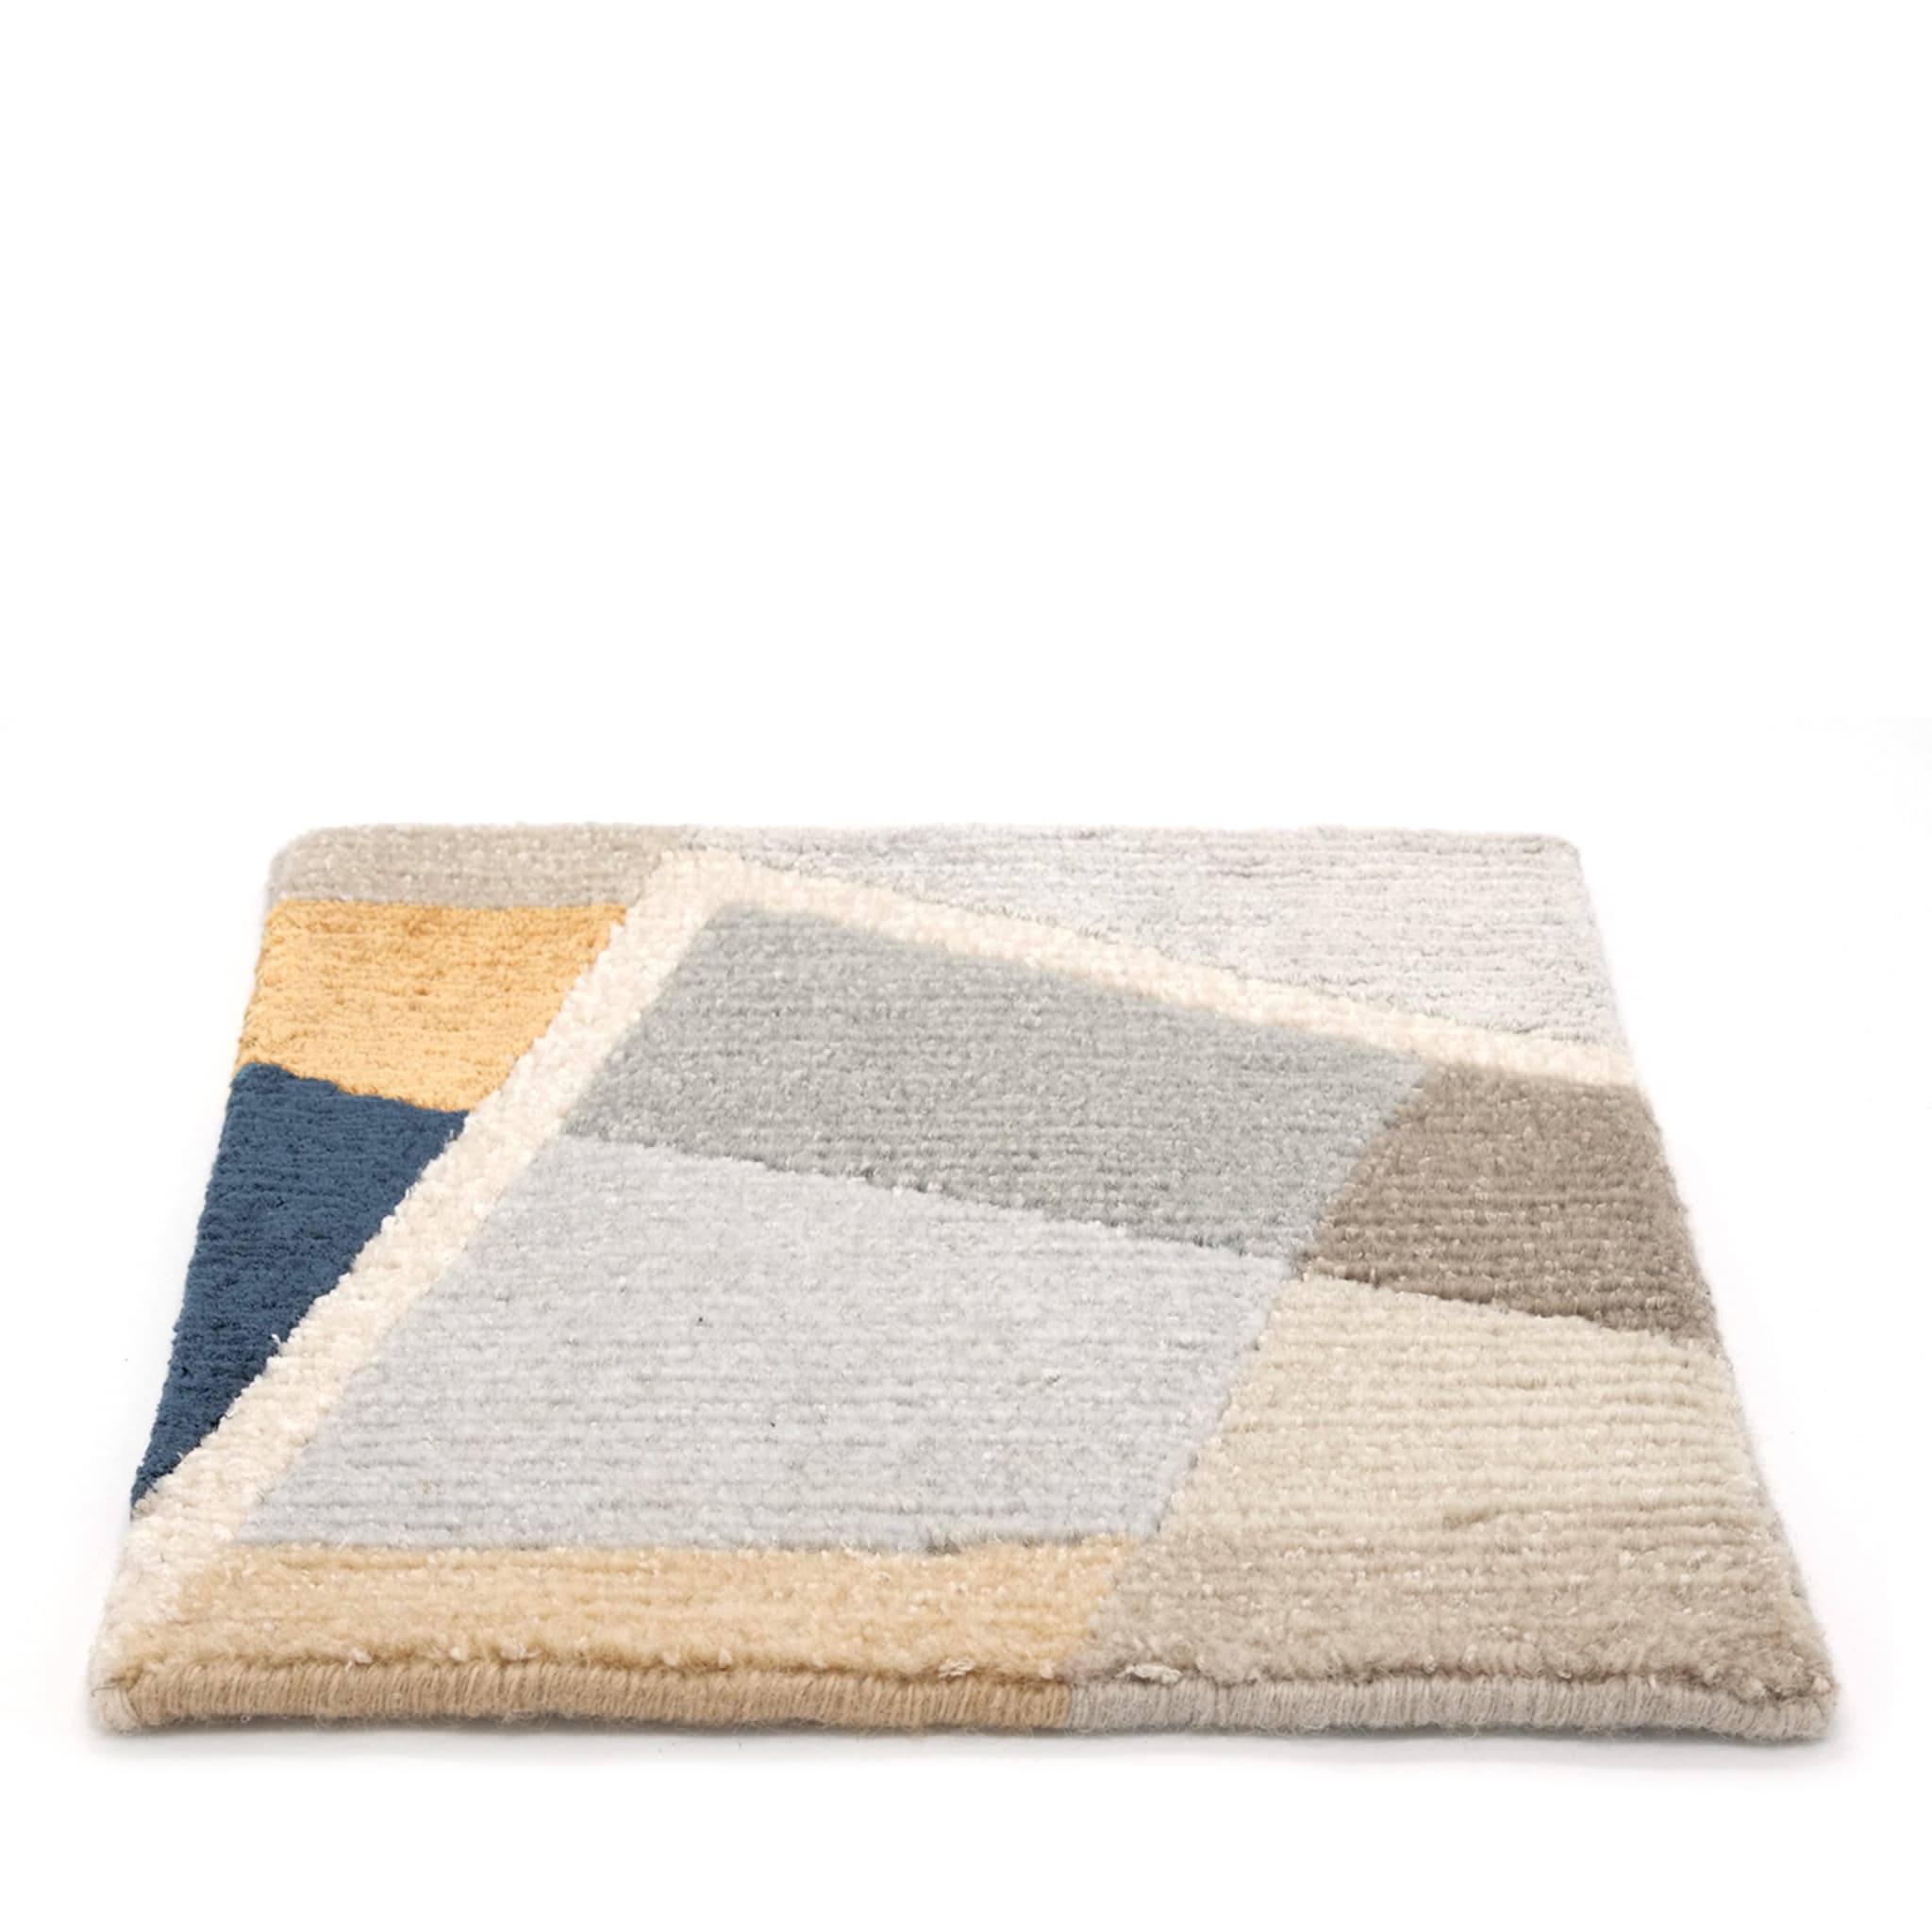 Galeries Lafayette Rug Ambiance Collection - Alternative view 1